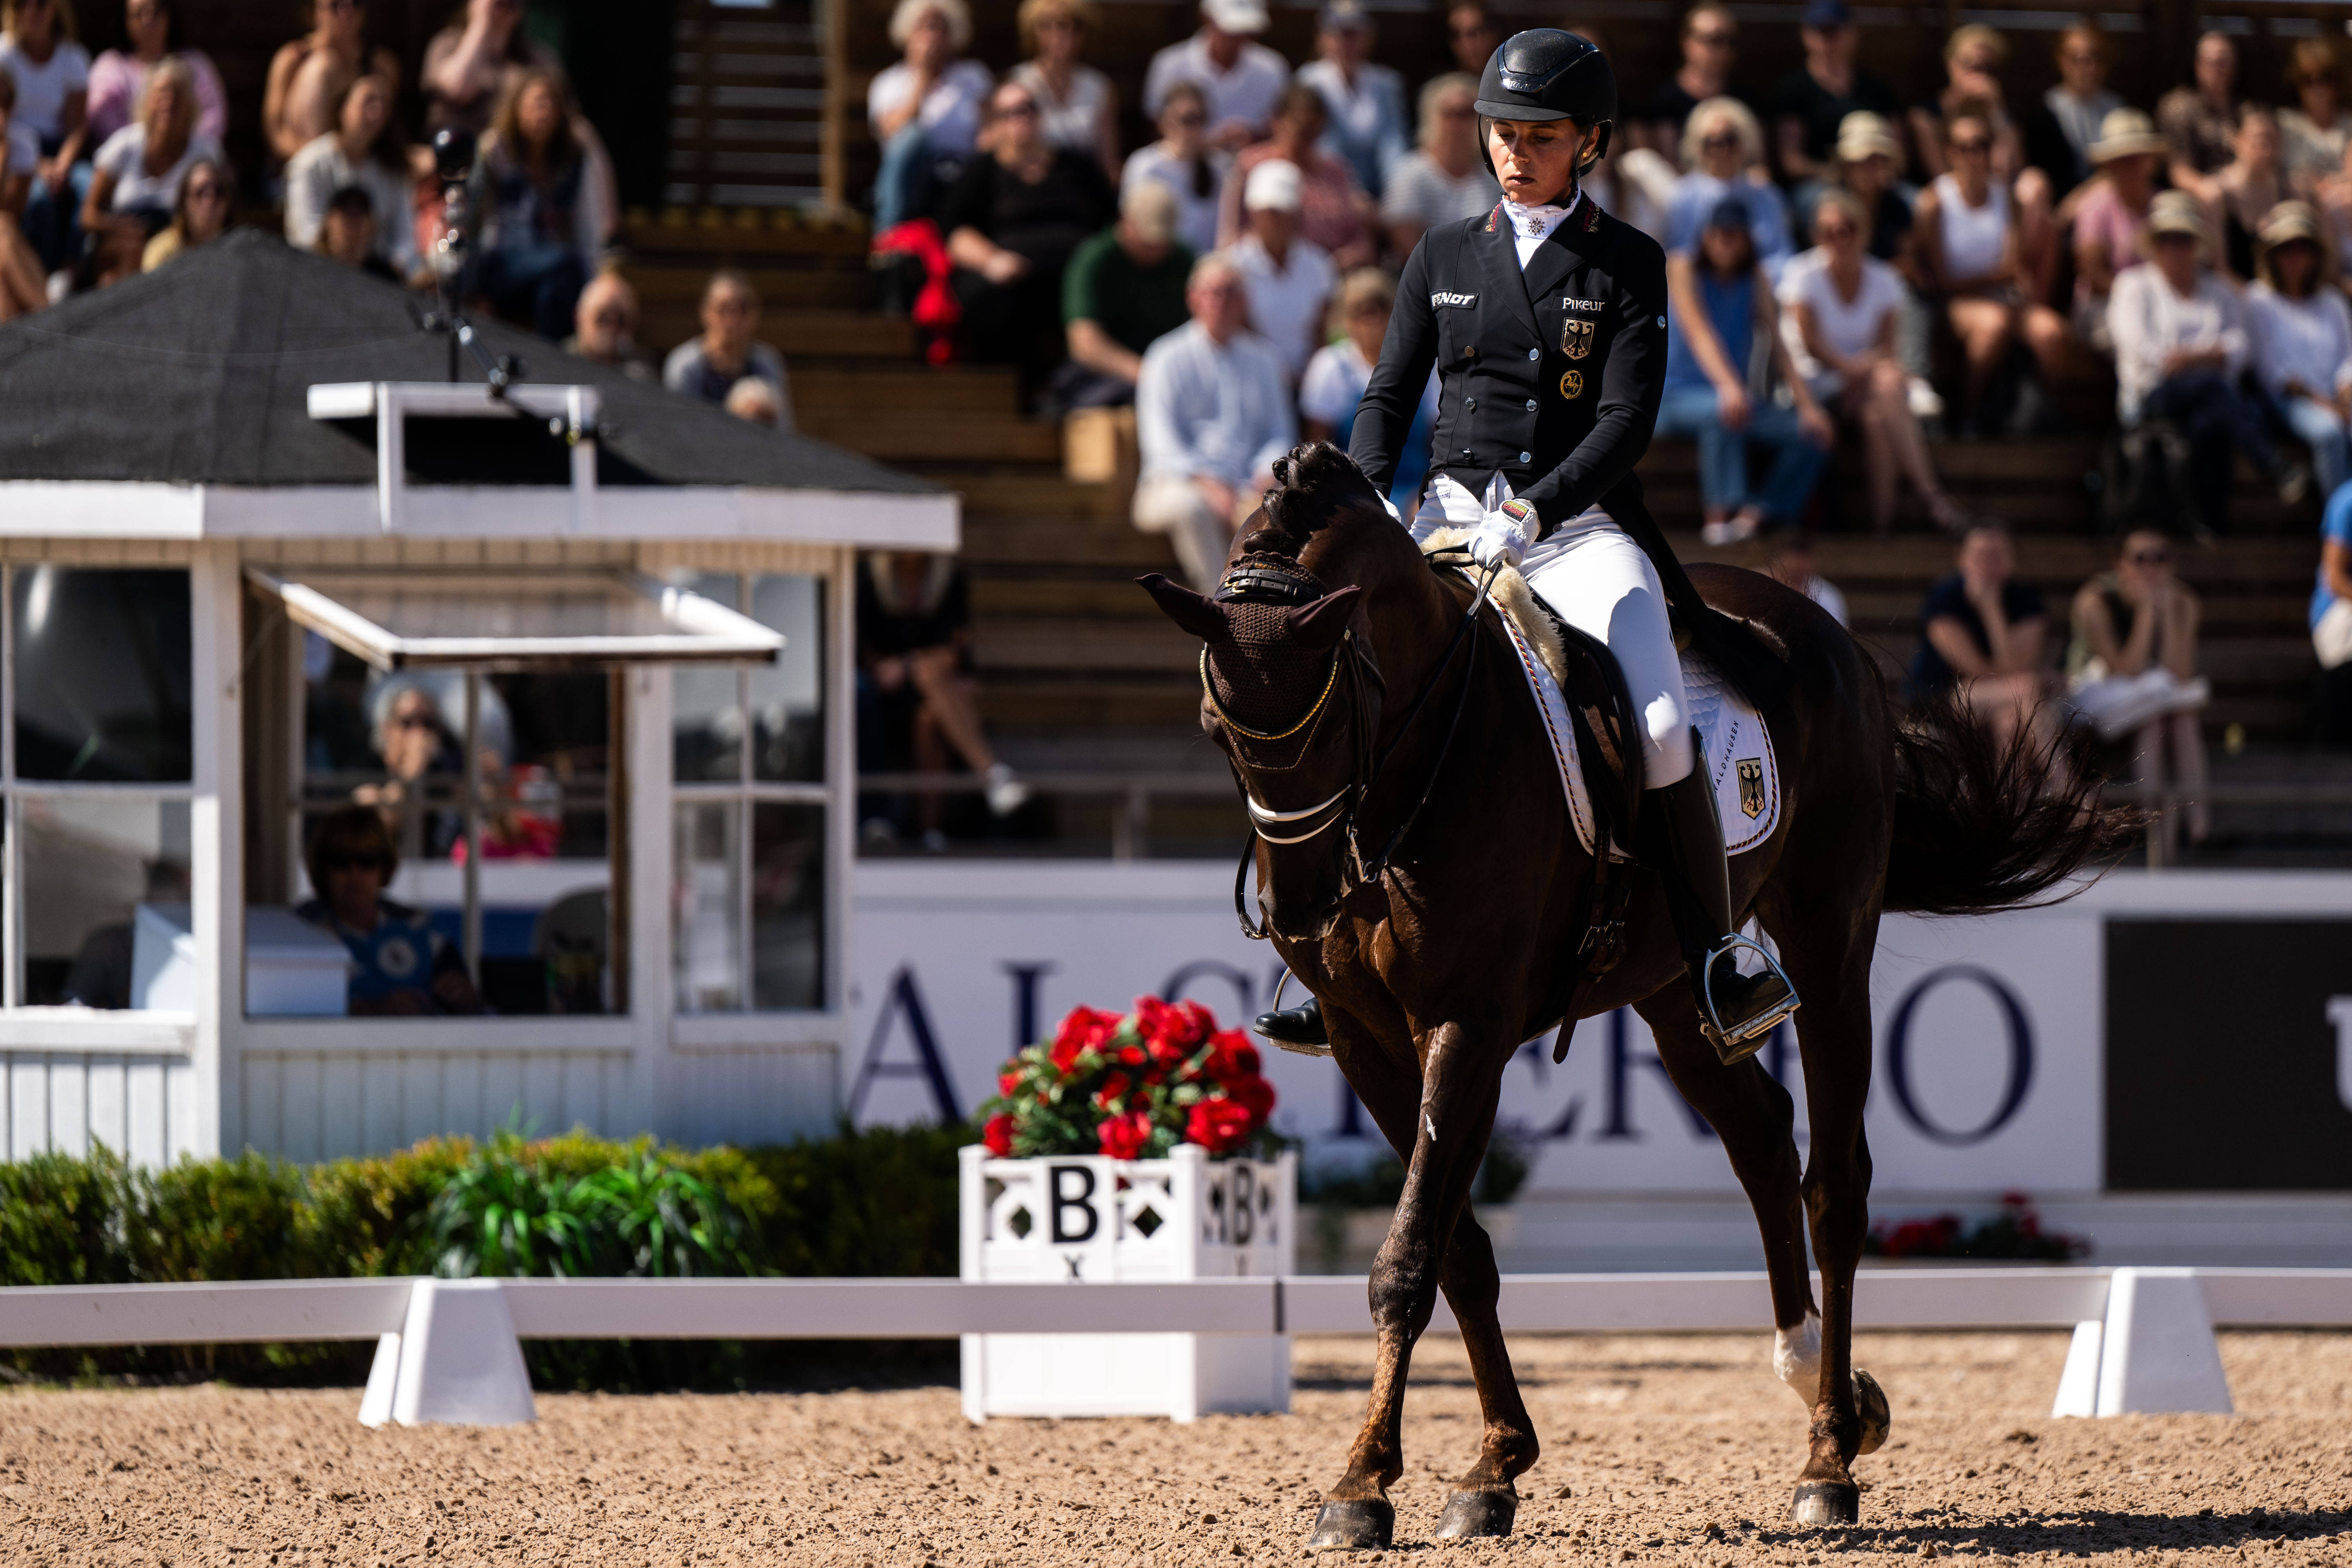 The Equestrian Cup, Grand Prix Montblanc Free Live Stream Online - How to Watch and Stream Major League and College Sports